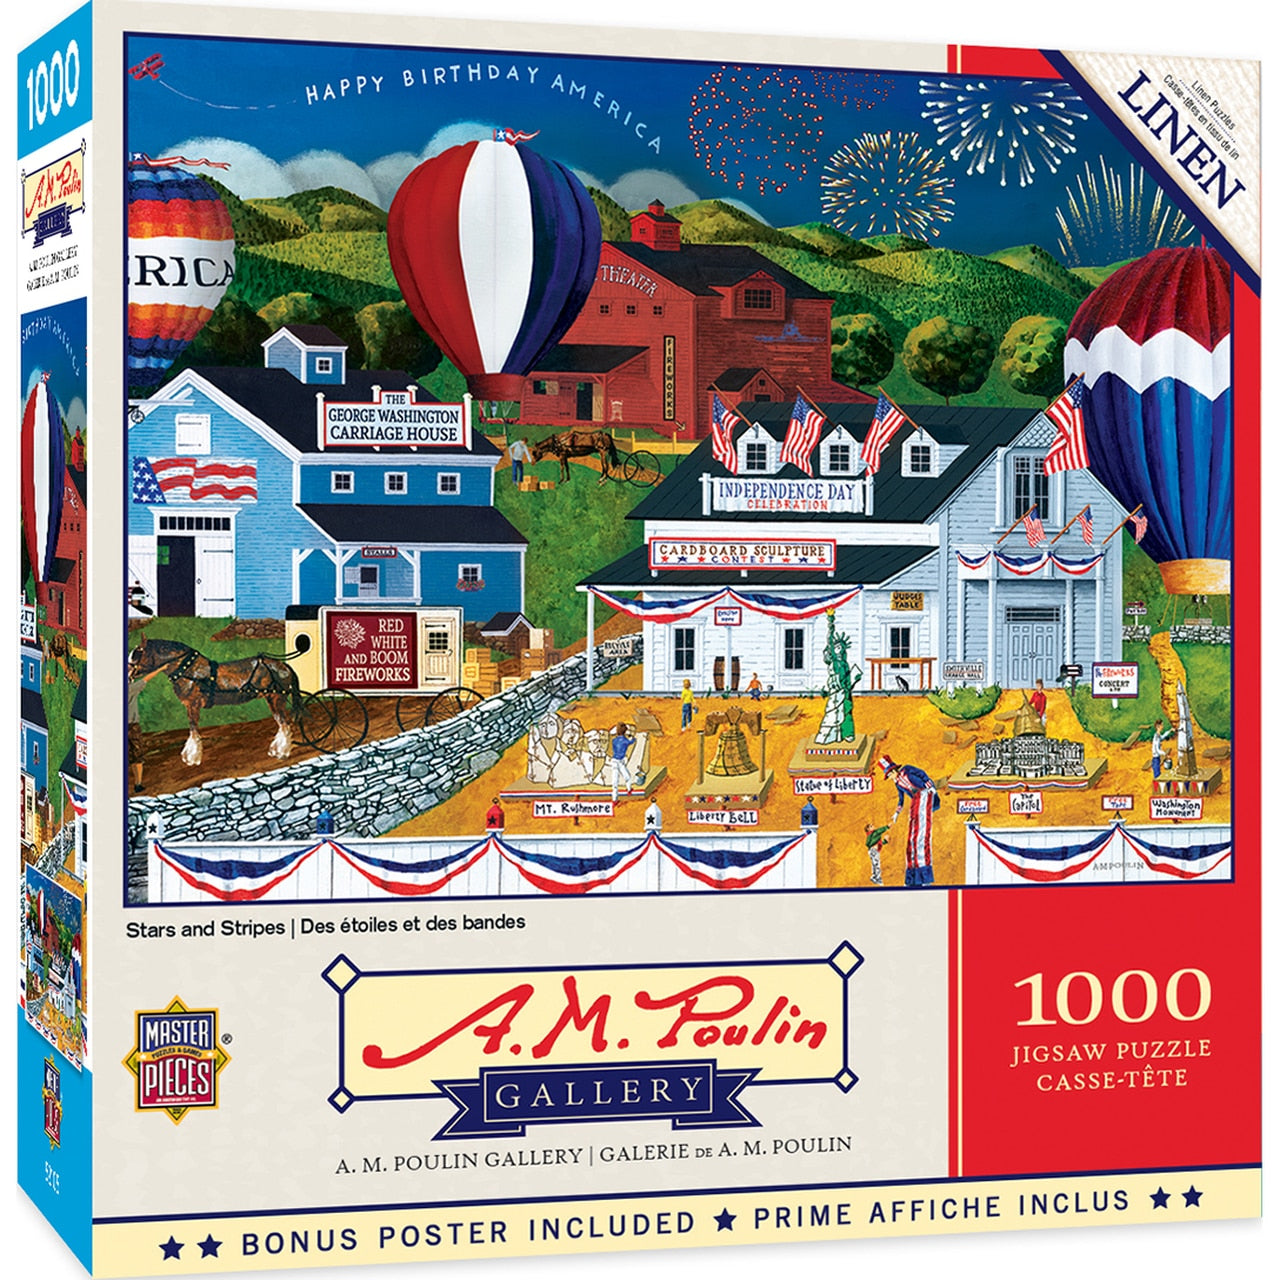 Stars and Stripes - A.M. Poulin 1000 Piece Puzzle    